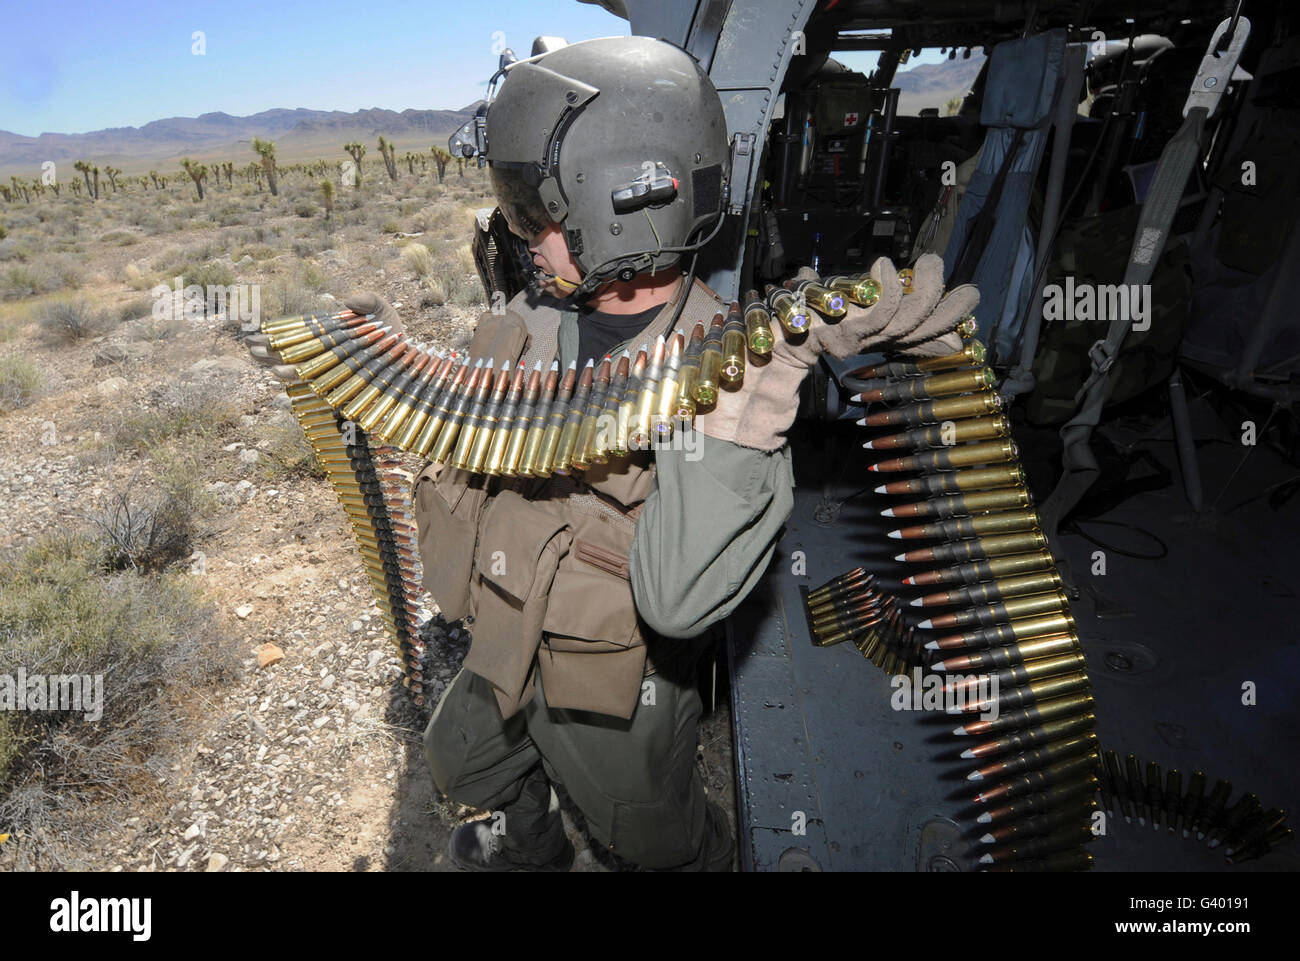 A soldier carries .50 caliber machine gun ammo to reload from an HH-60 Pave Hawk. Stock Photo